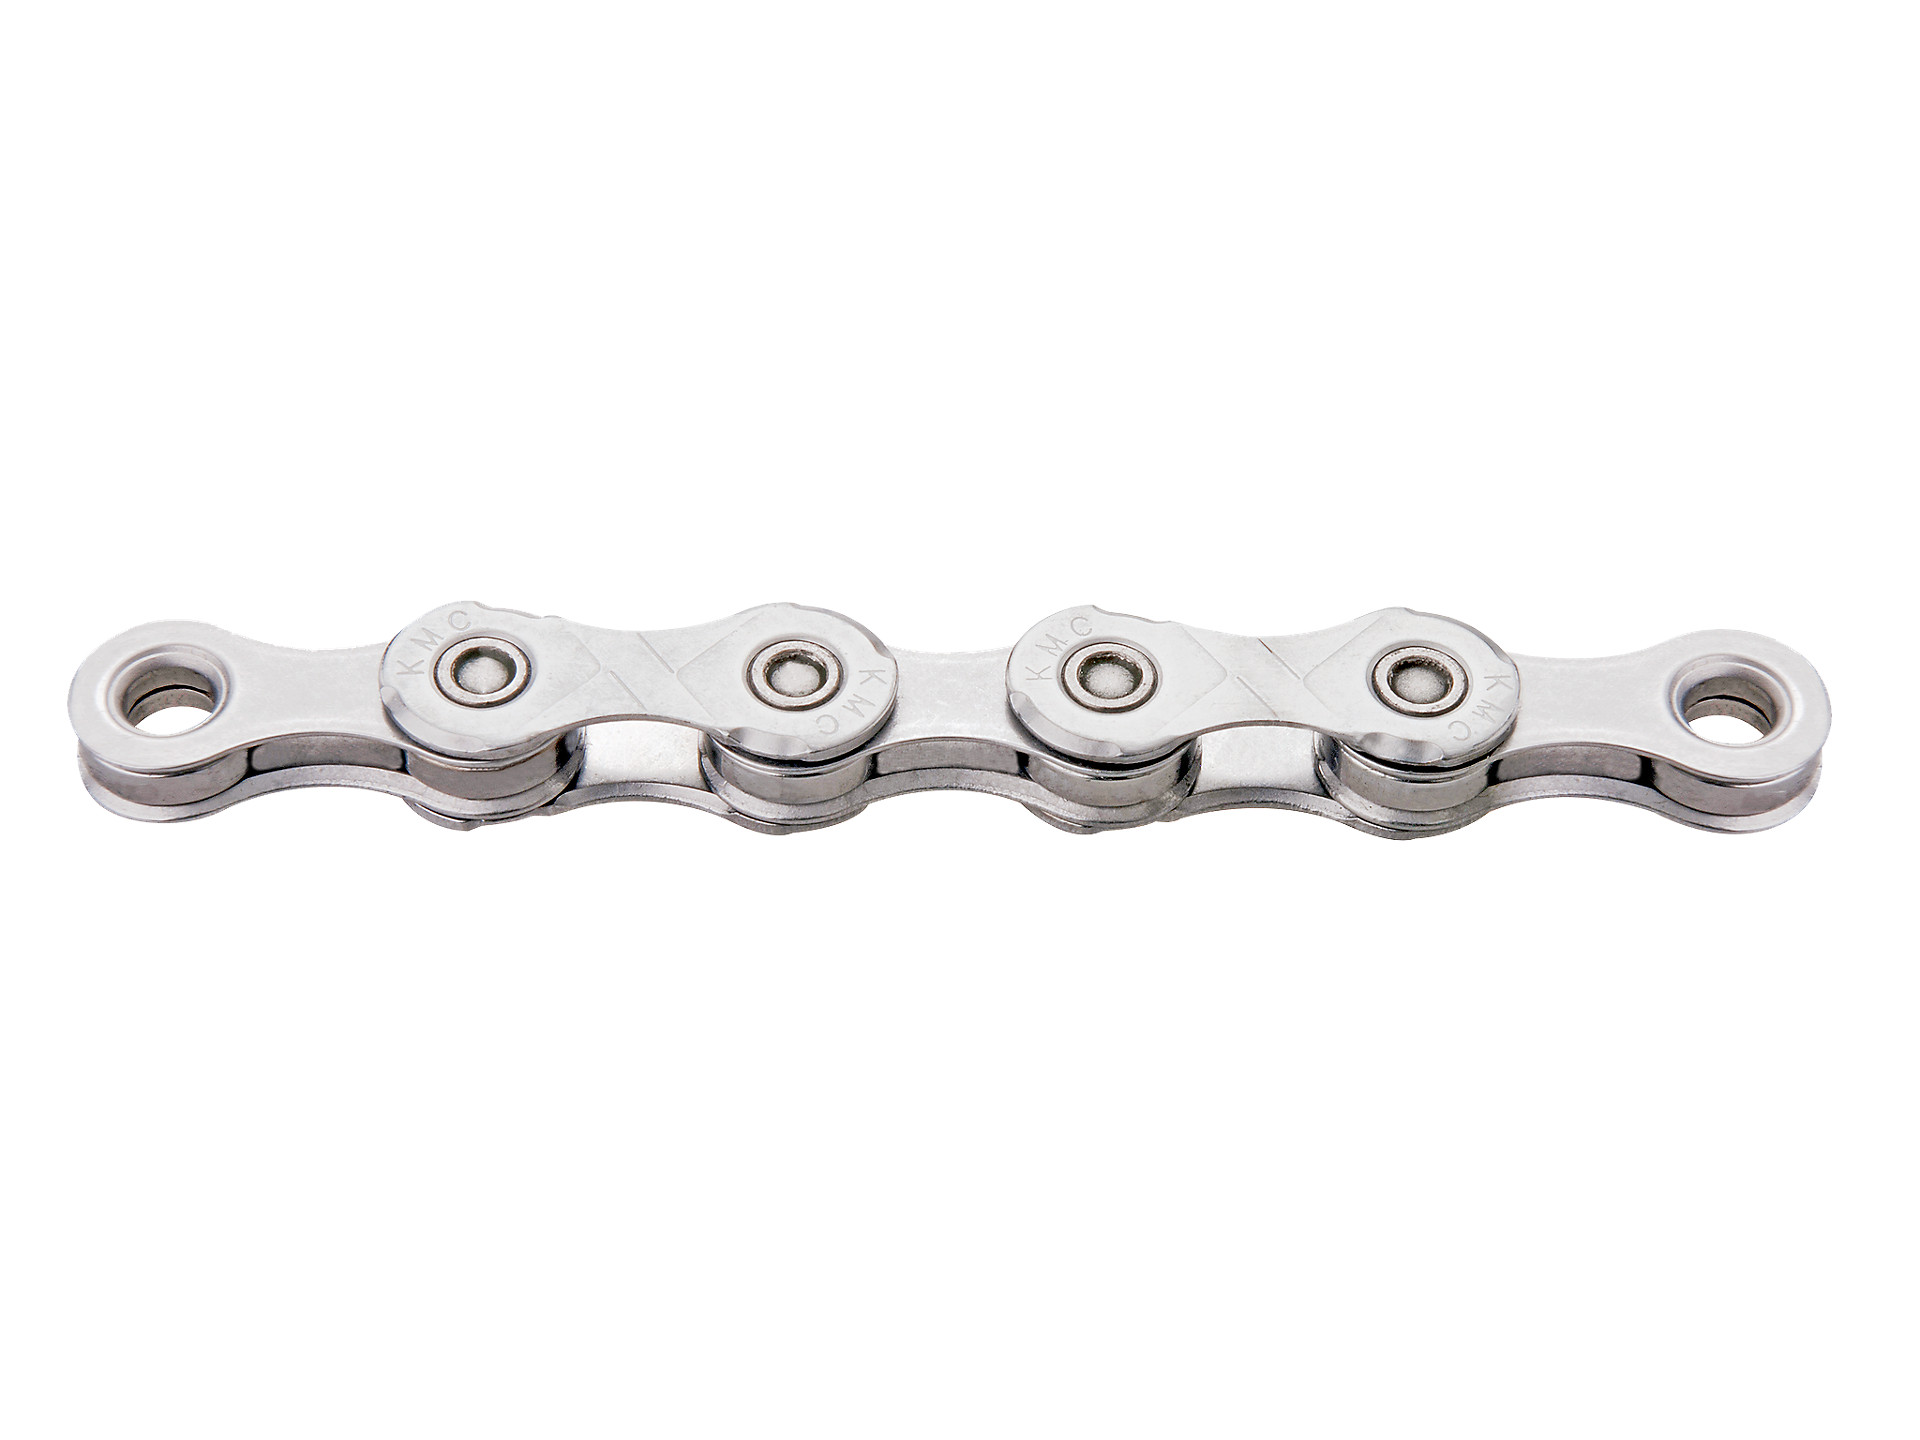 New KMC Stainless Steel Chain Checker Silver 